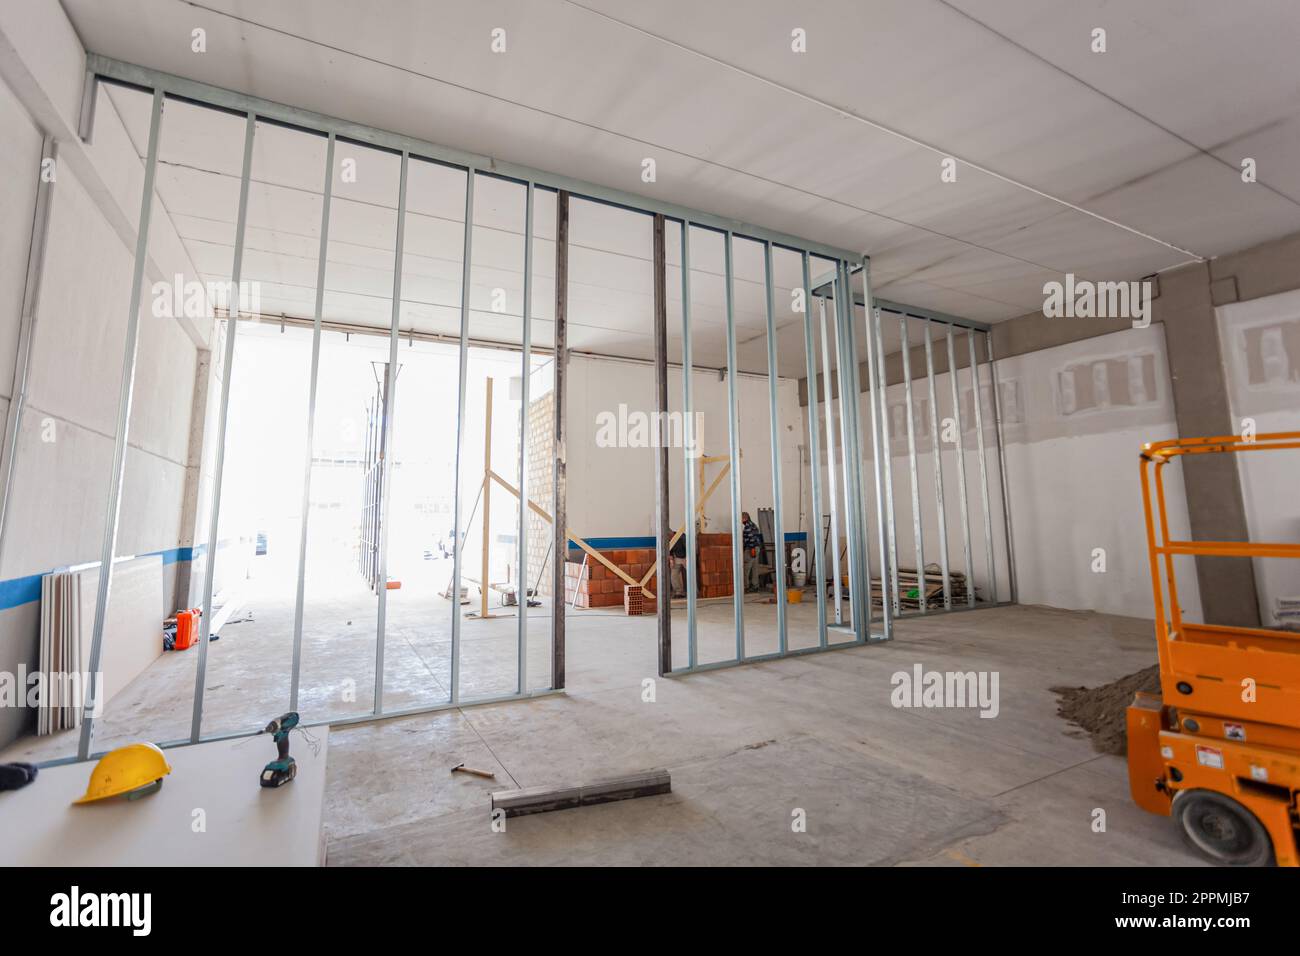 Refurbishment of a large industrial building. Stock Photo